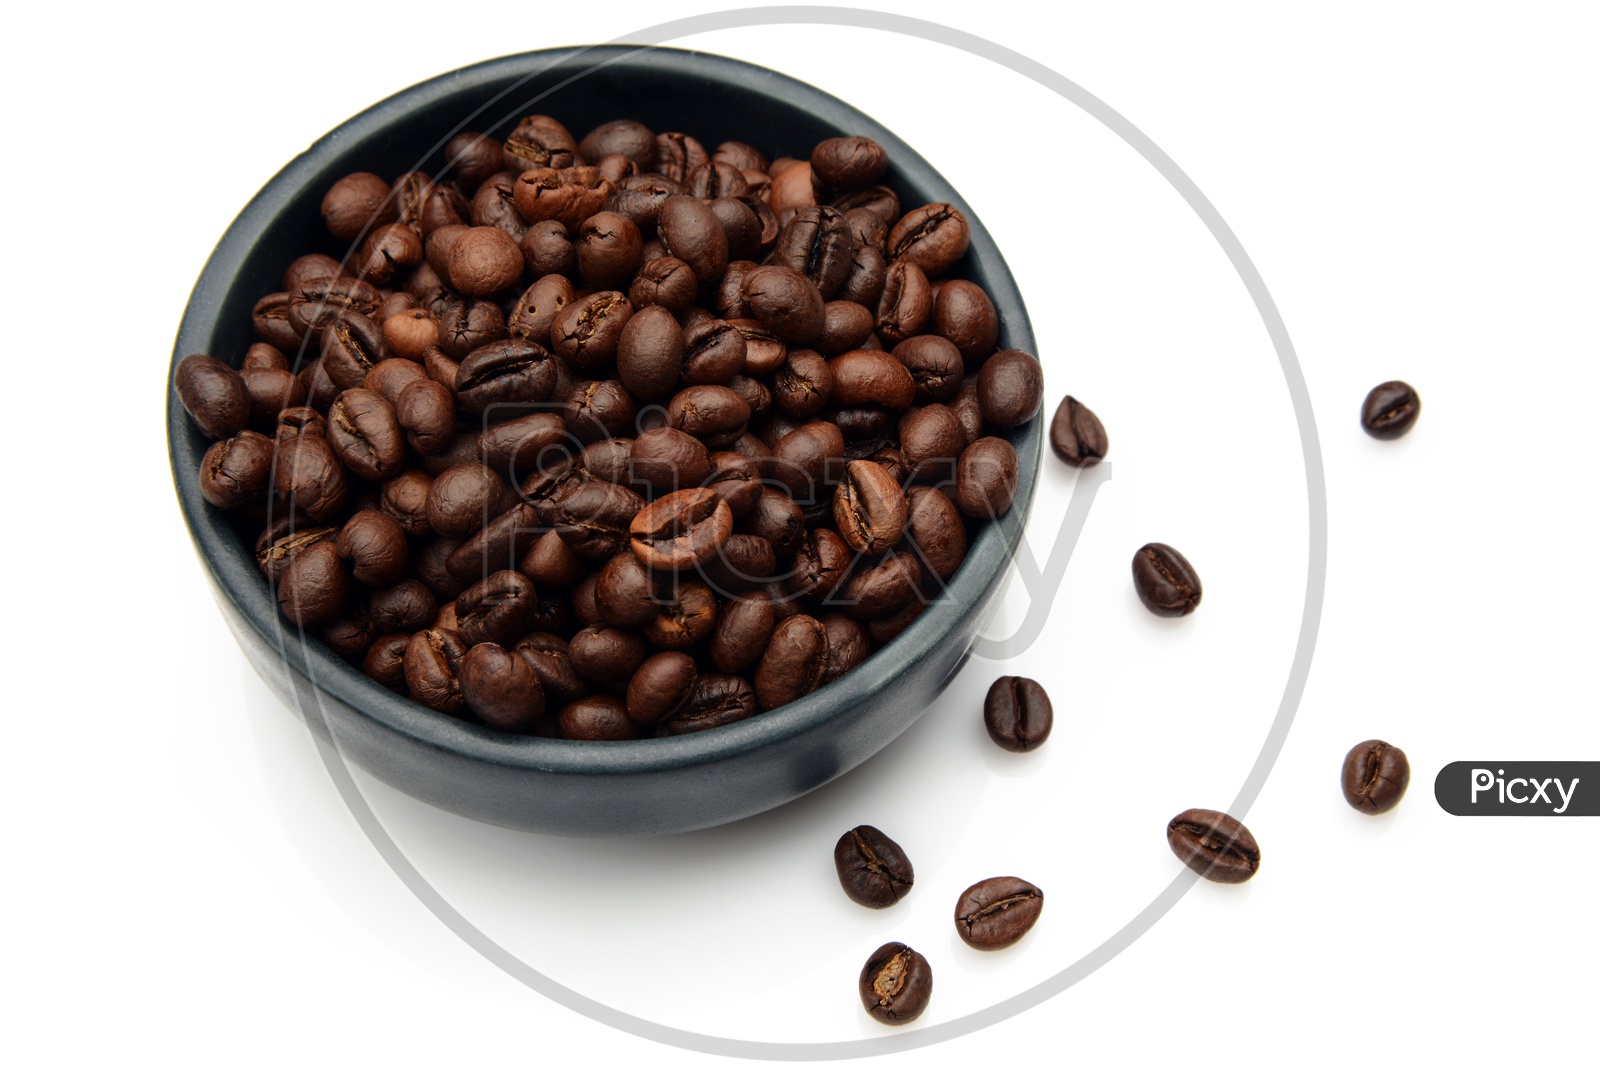 Roasted Coffee beans in a bowl